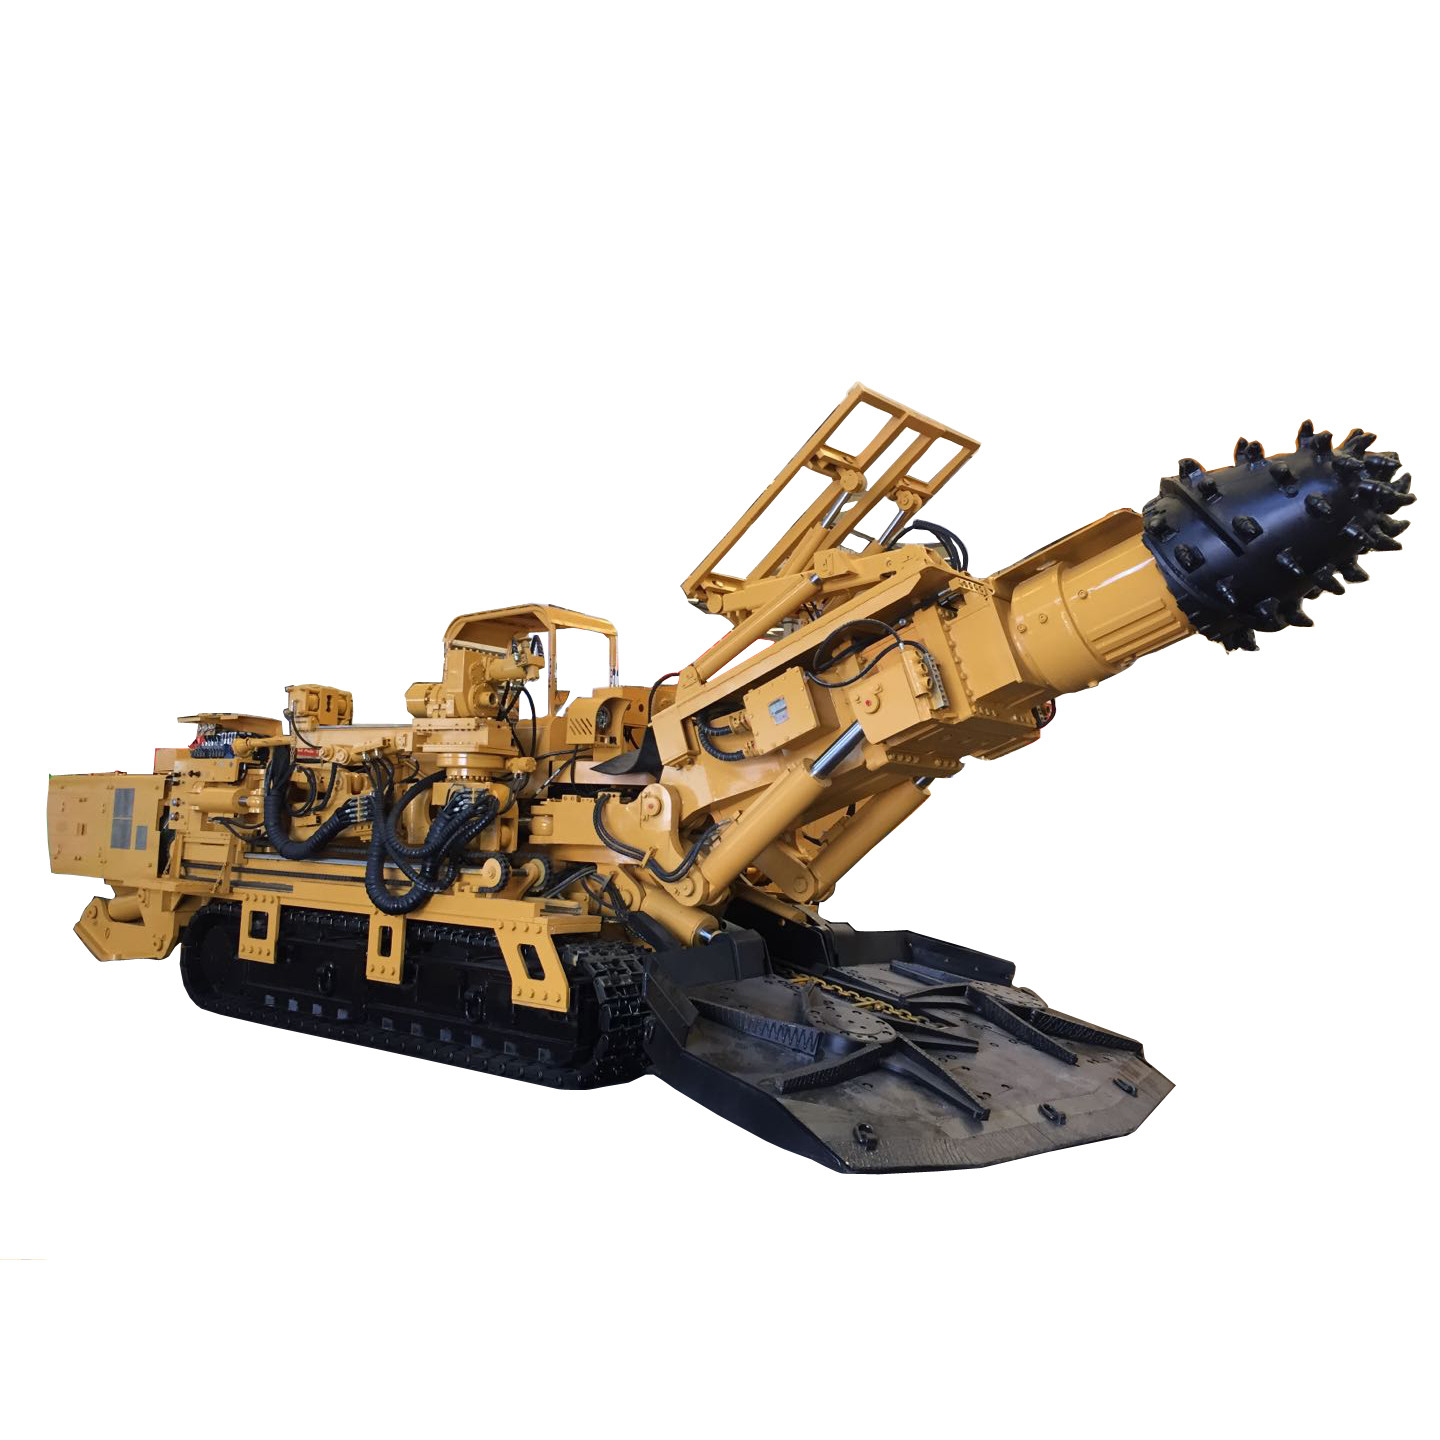 bolter miner integrated the bolting machine and the roadheader to one bolter miner